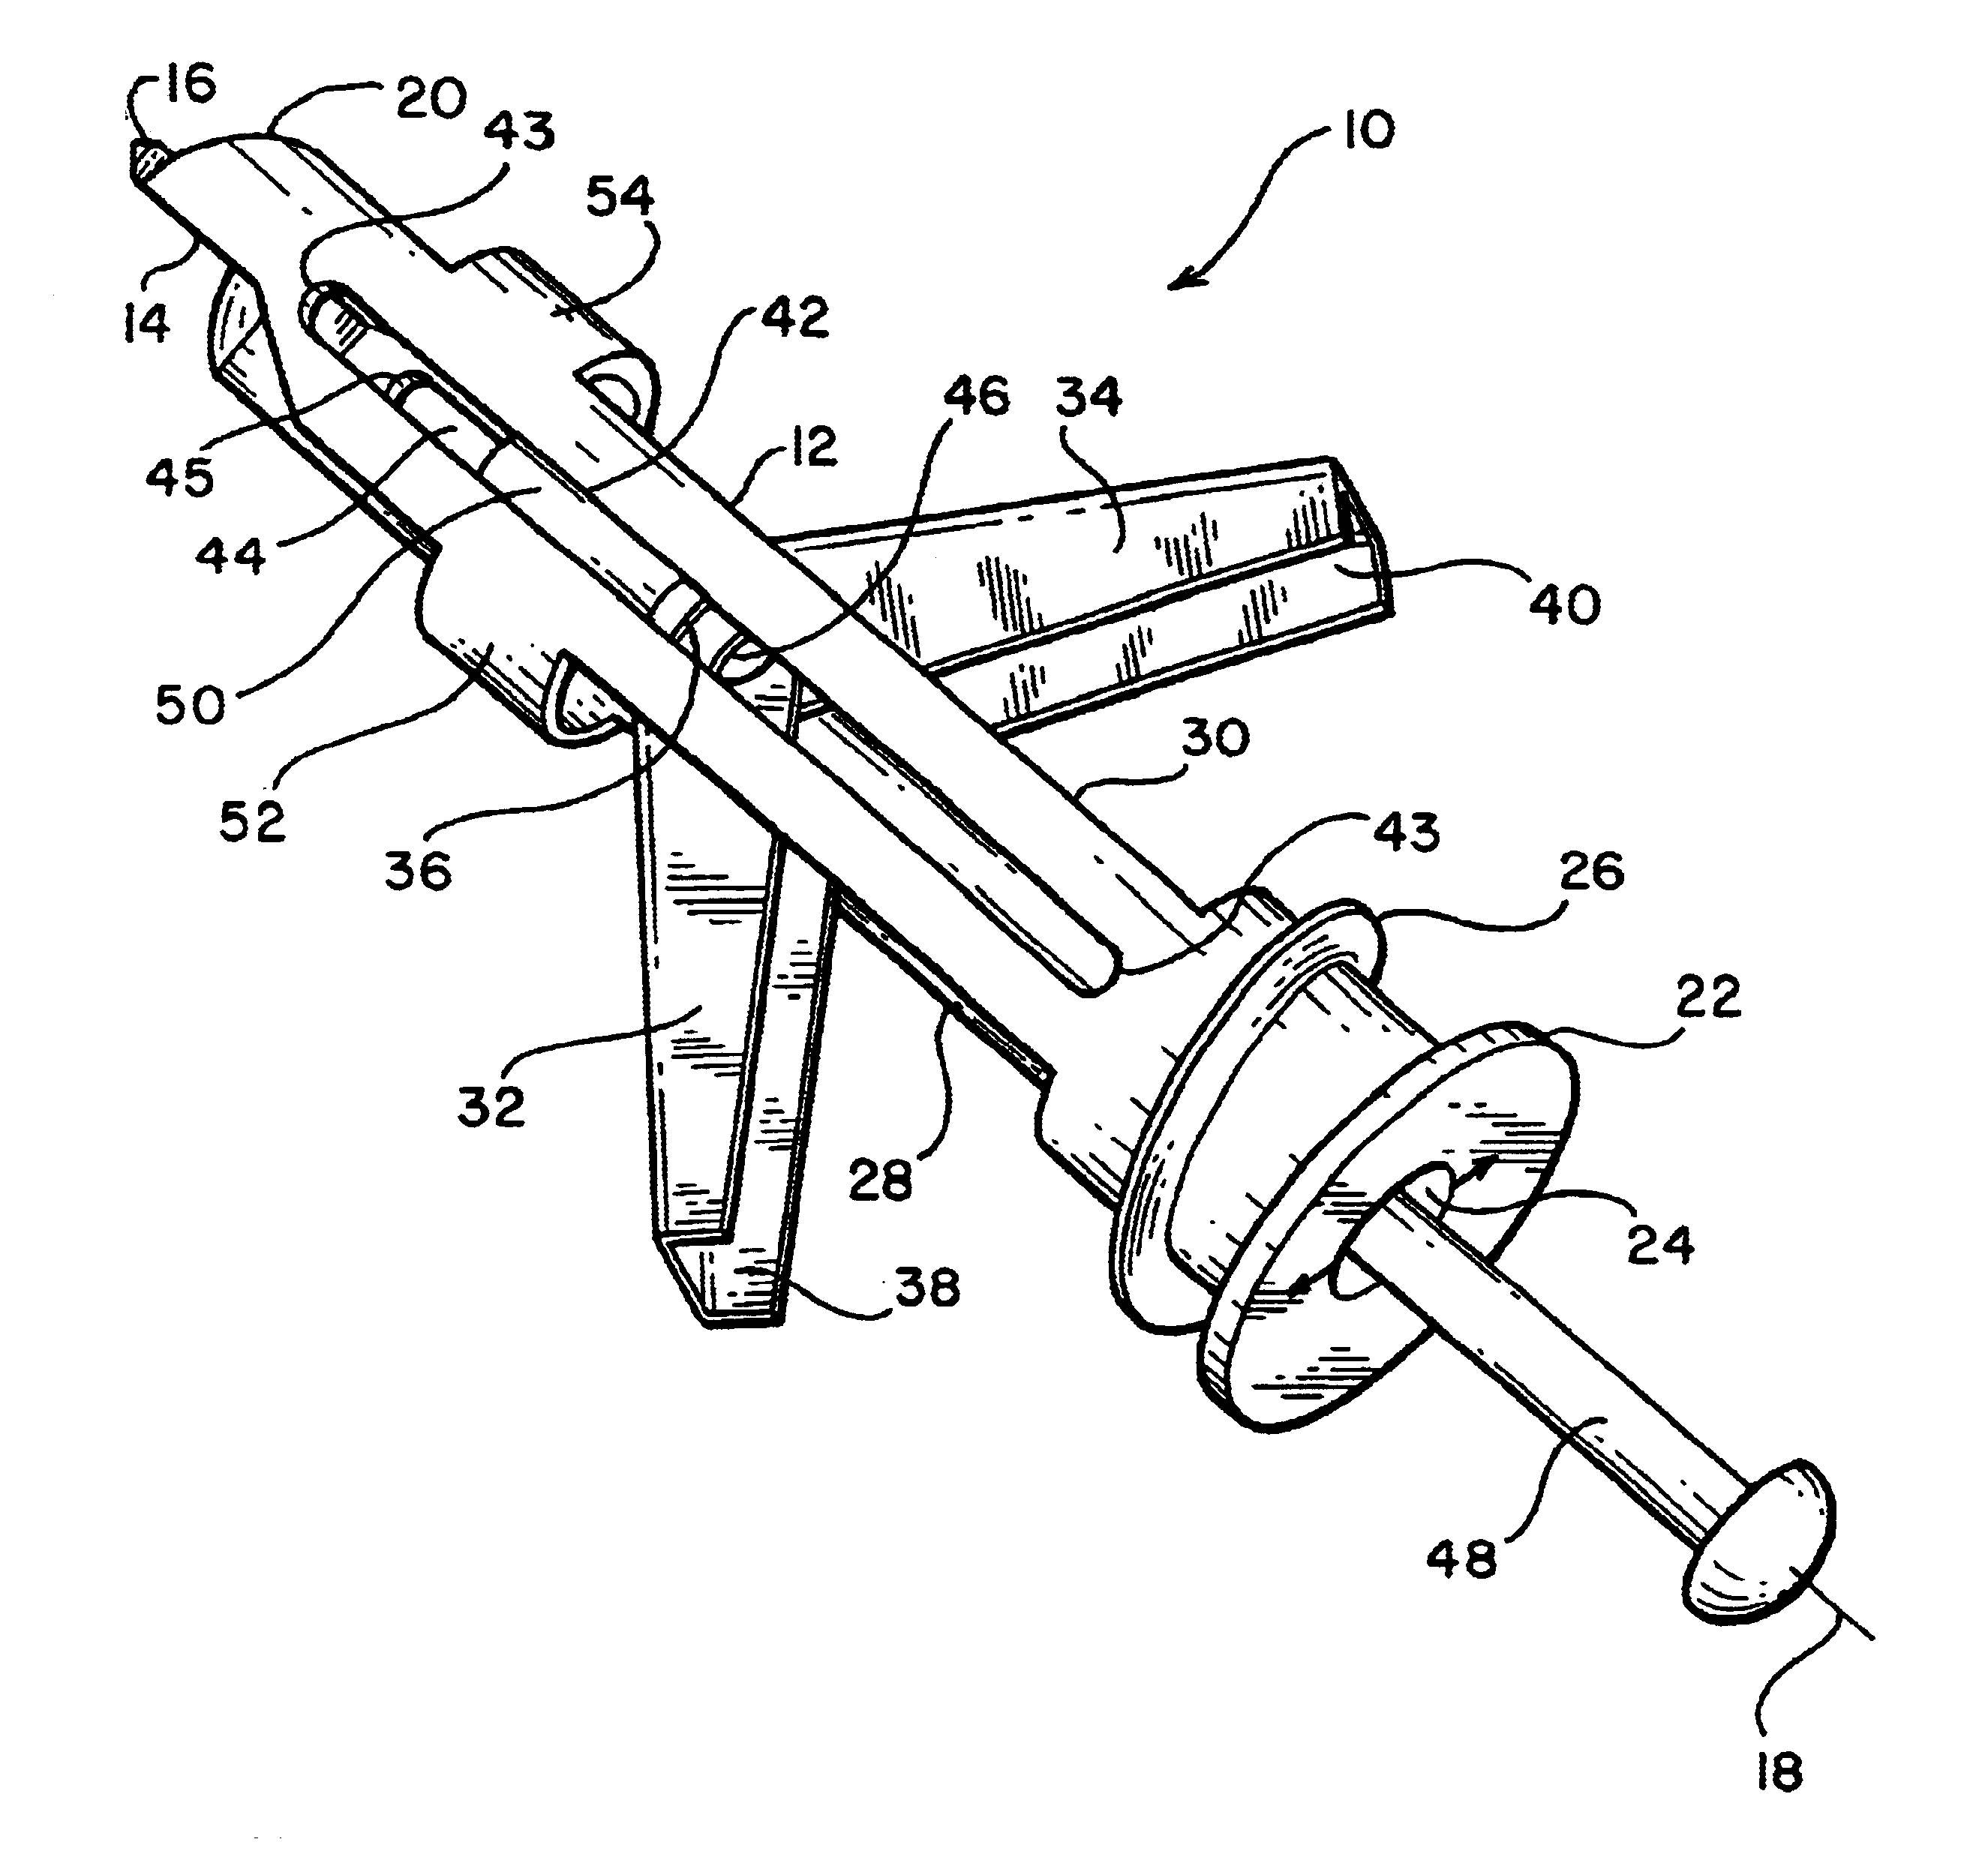 Heavy duty toggle bolt fastener assembly, and method of installing and removing the same